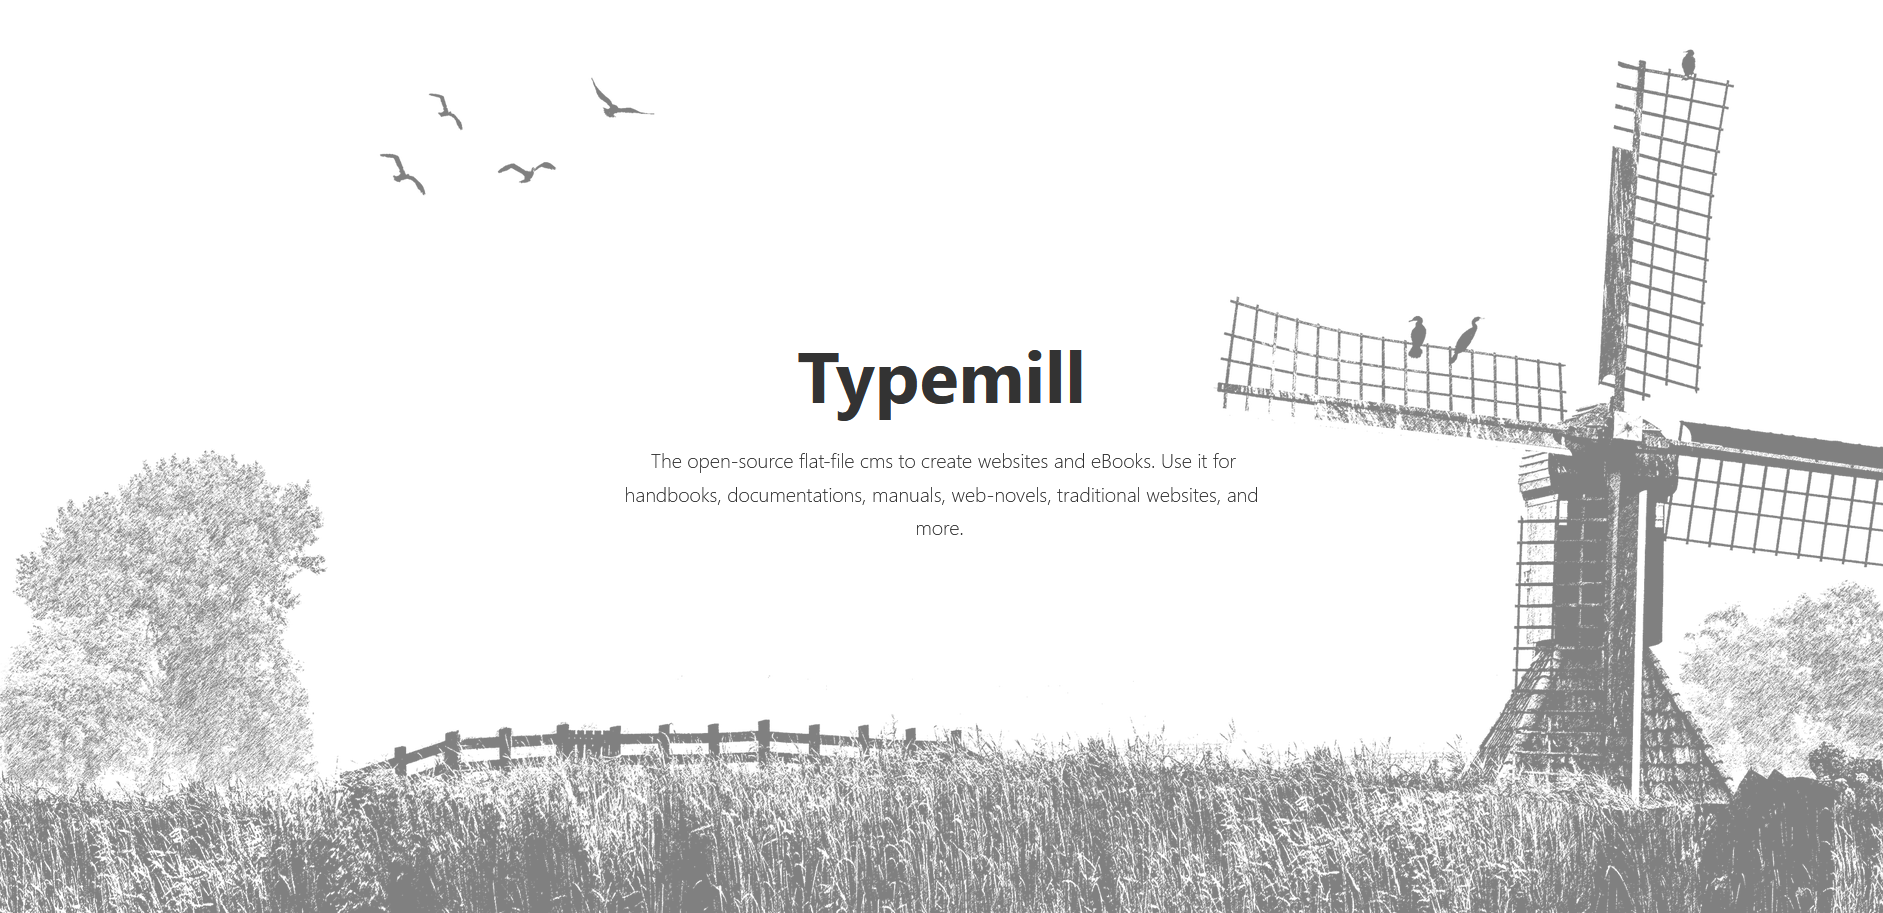 Typemill - The Open Source Flat-File CMS to Create Websites and eBooks